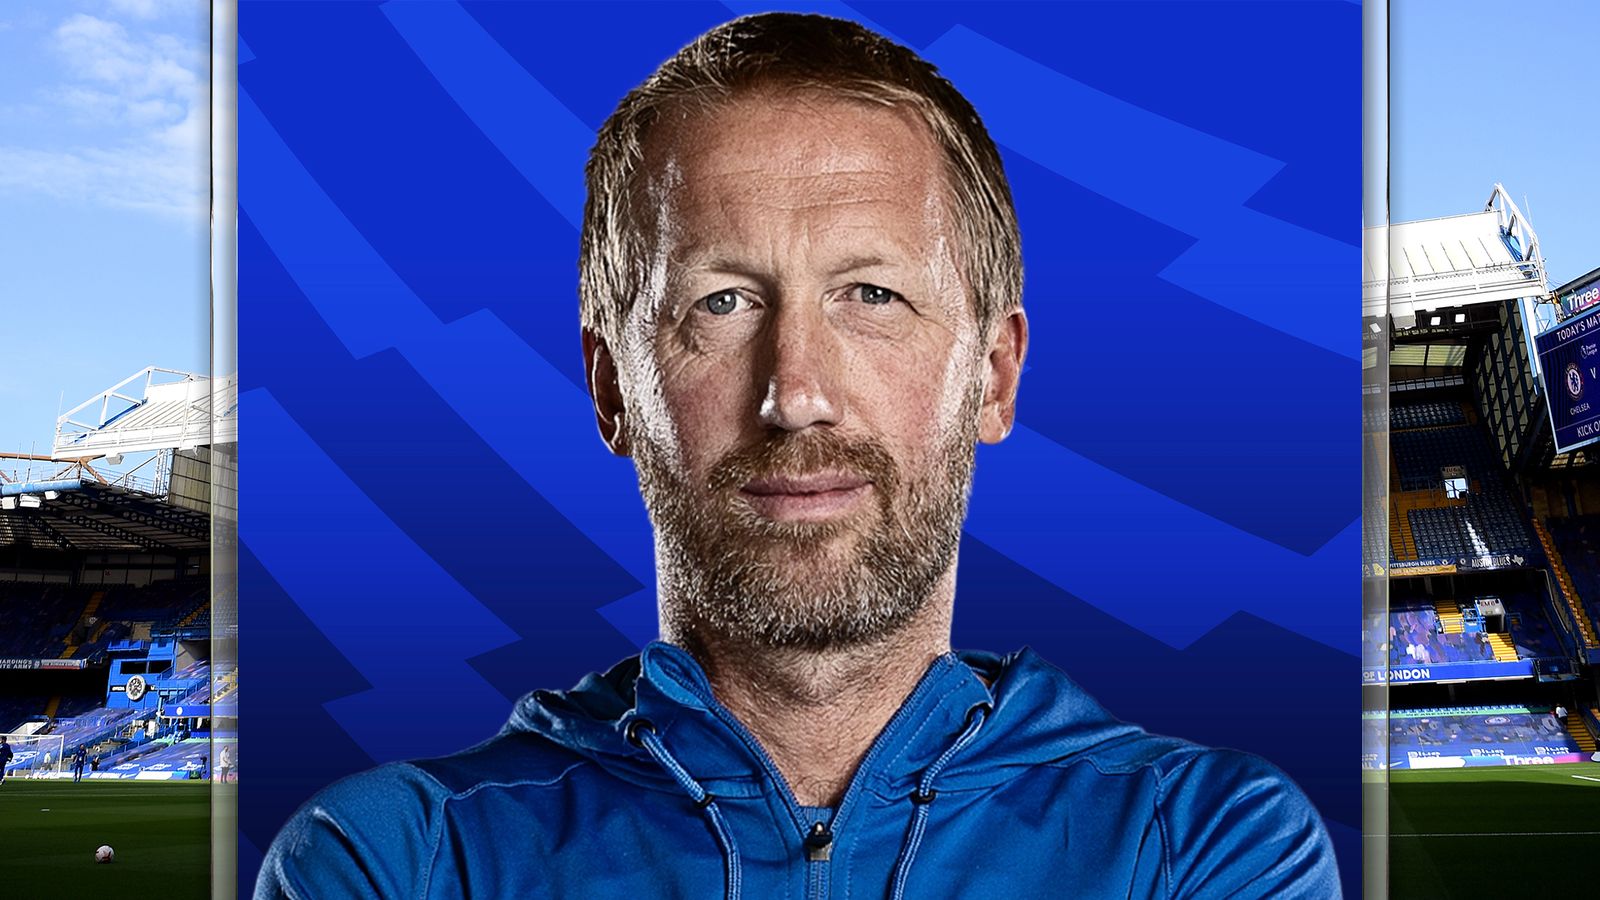 Graham Potter announced as Chelsea's new head coach on a five-year deal